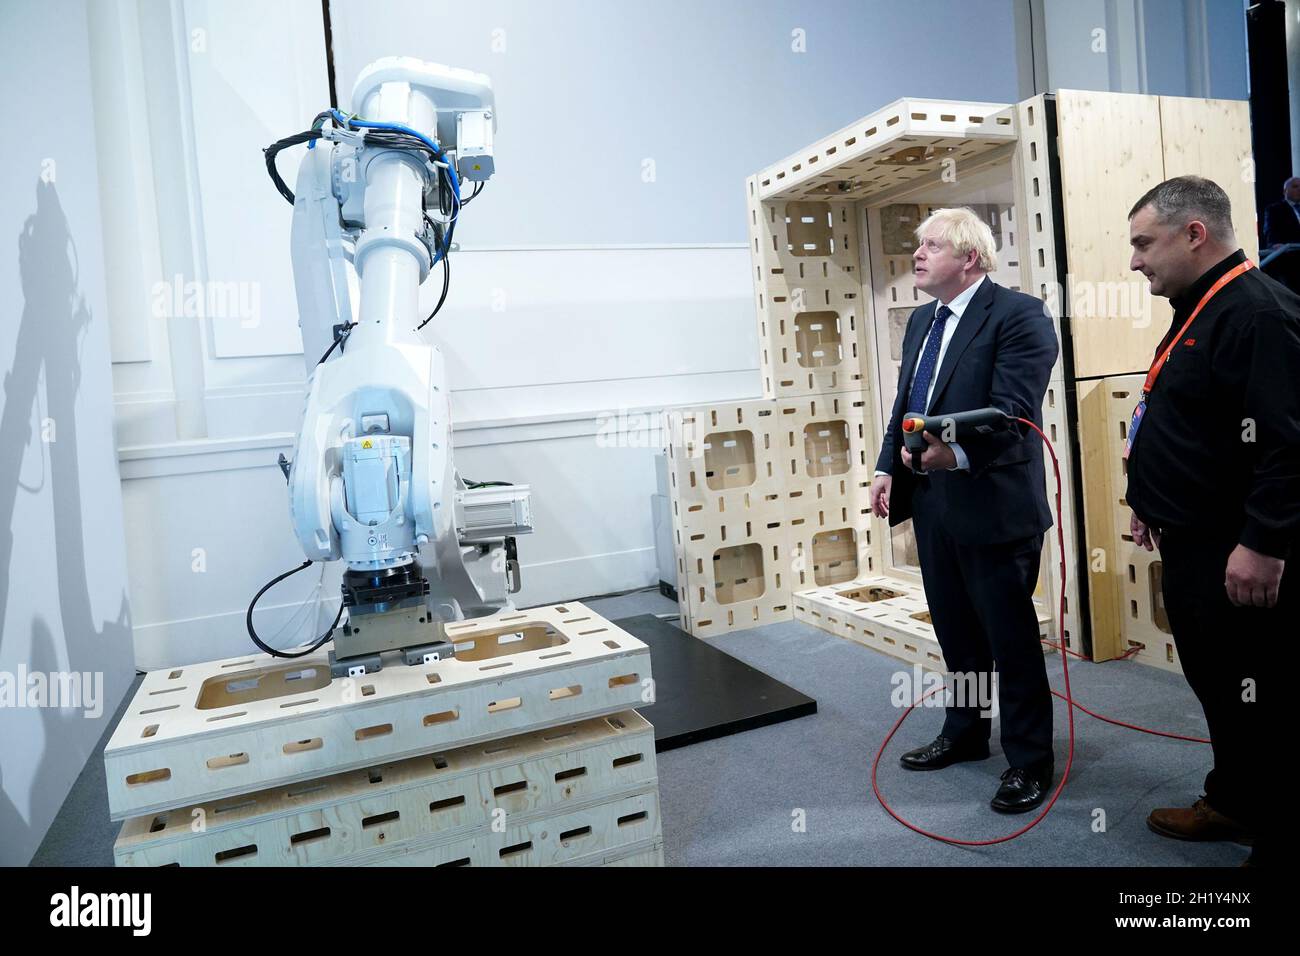 Prime Minister Boris Johnson operating a robot arm at the Auar (Automated Architectire) stand during a visit to the Innovation Zone of the Global Investment Summit at the Science Museum, London. Picture date: Tuesday October 19, 2021. Stock Photo